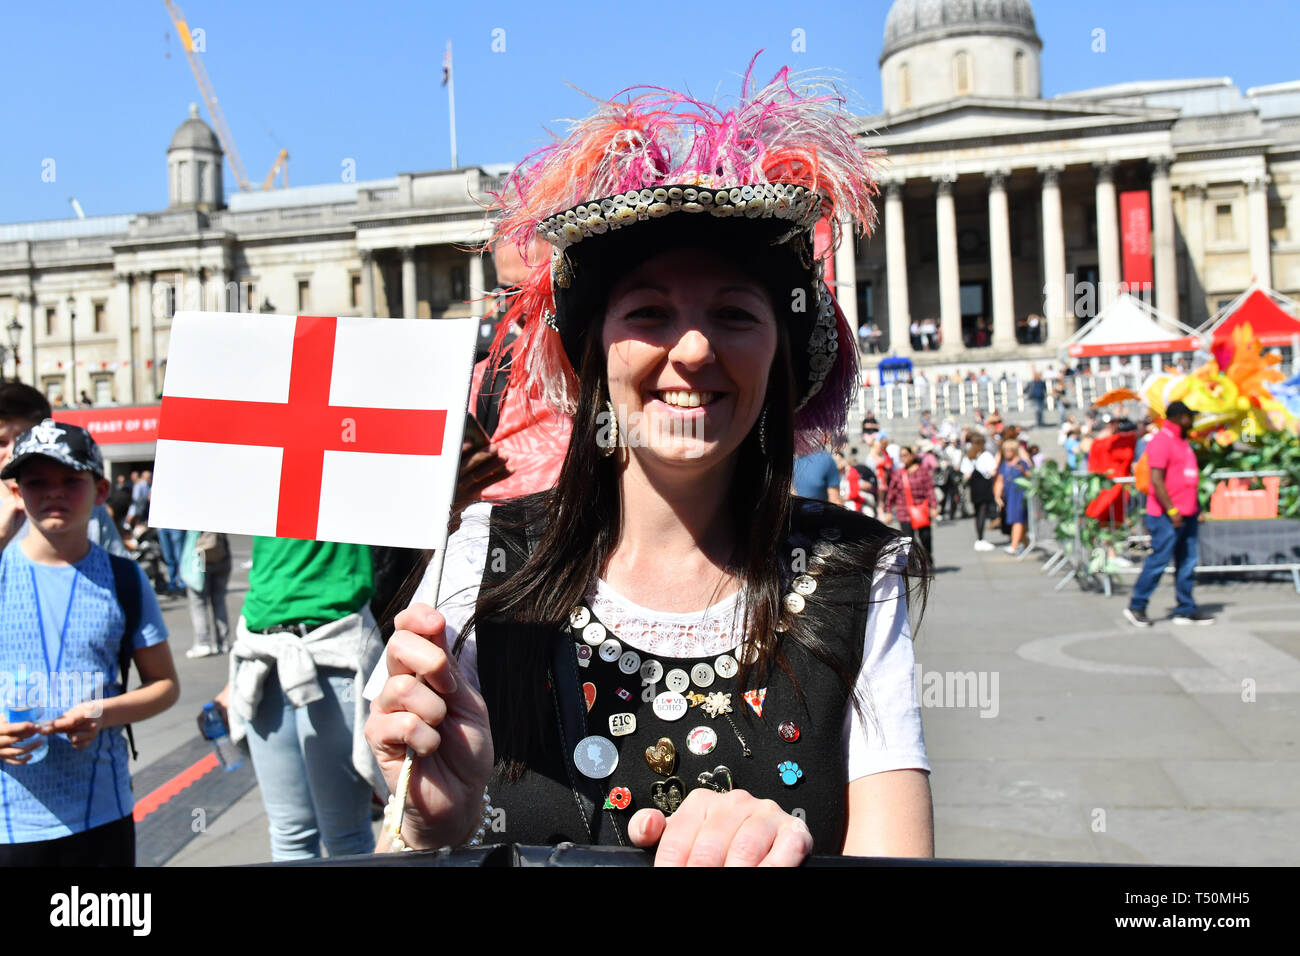 London, UK. 20th April, 2019.Hundreds attend the Feast of St George to celebrate English Culture with music and English food stalls in Trafalgar Square on 20 April 2019, London, UK. Credit: Picture Capital/Alamy Live News Stock Photo